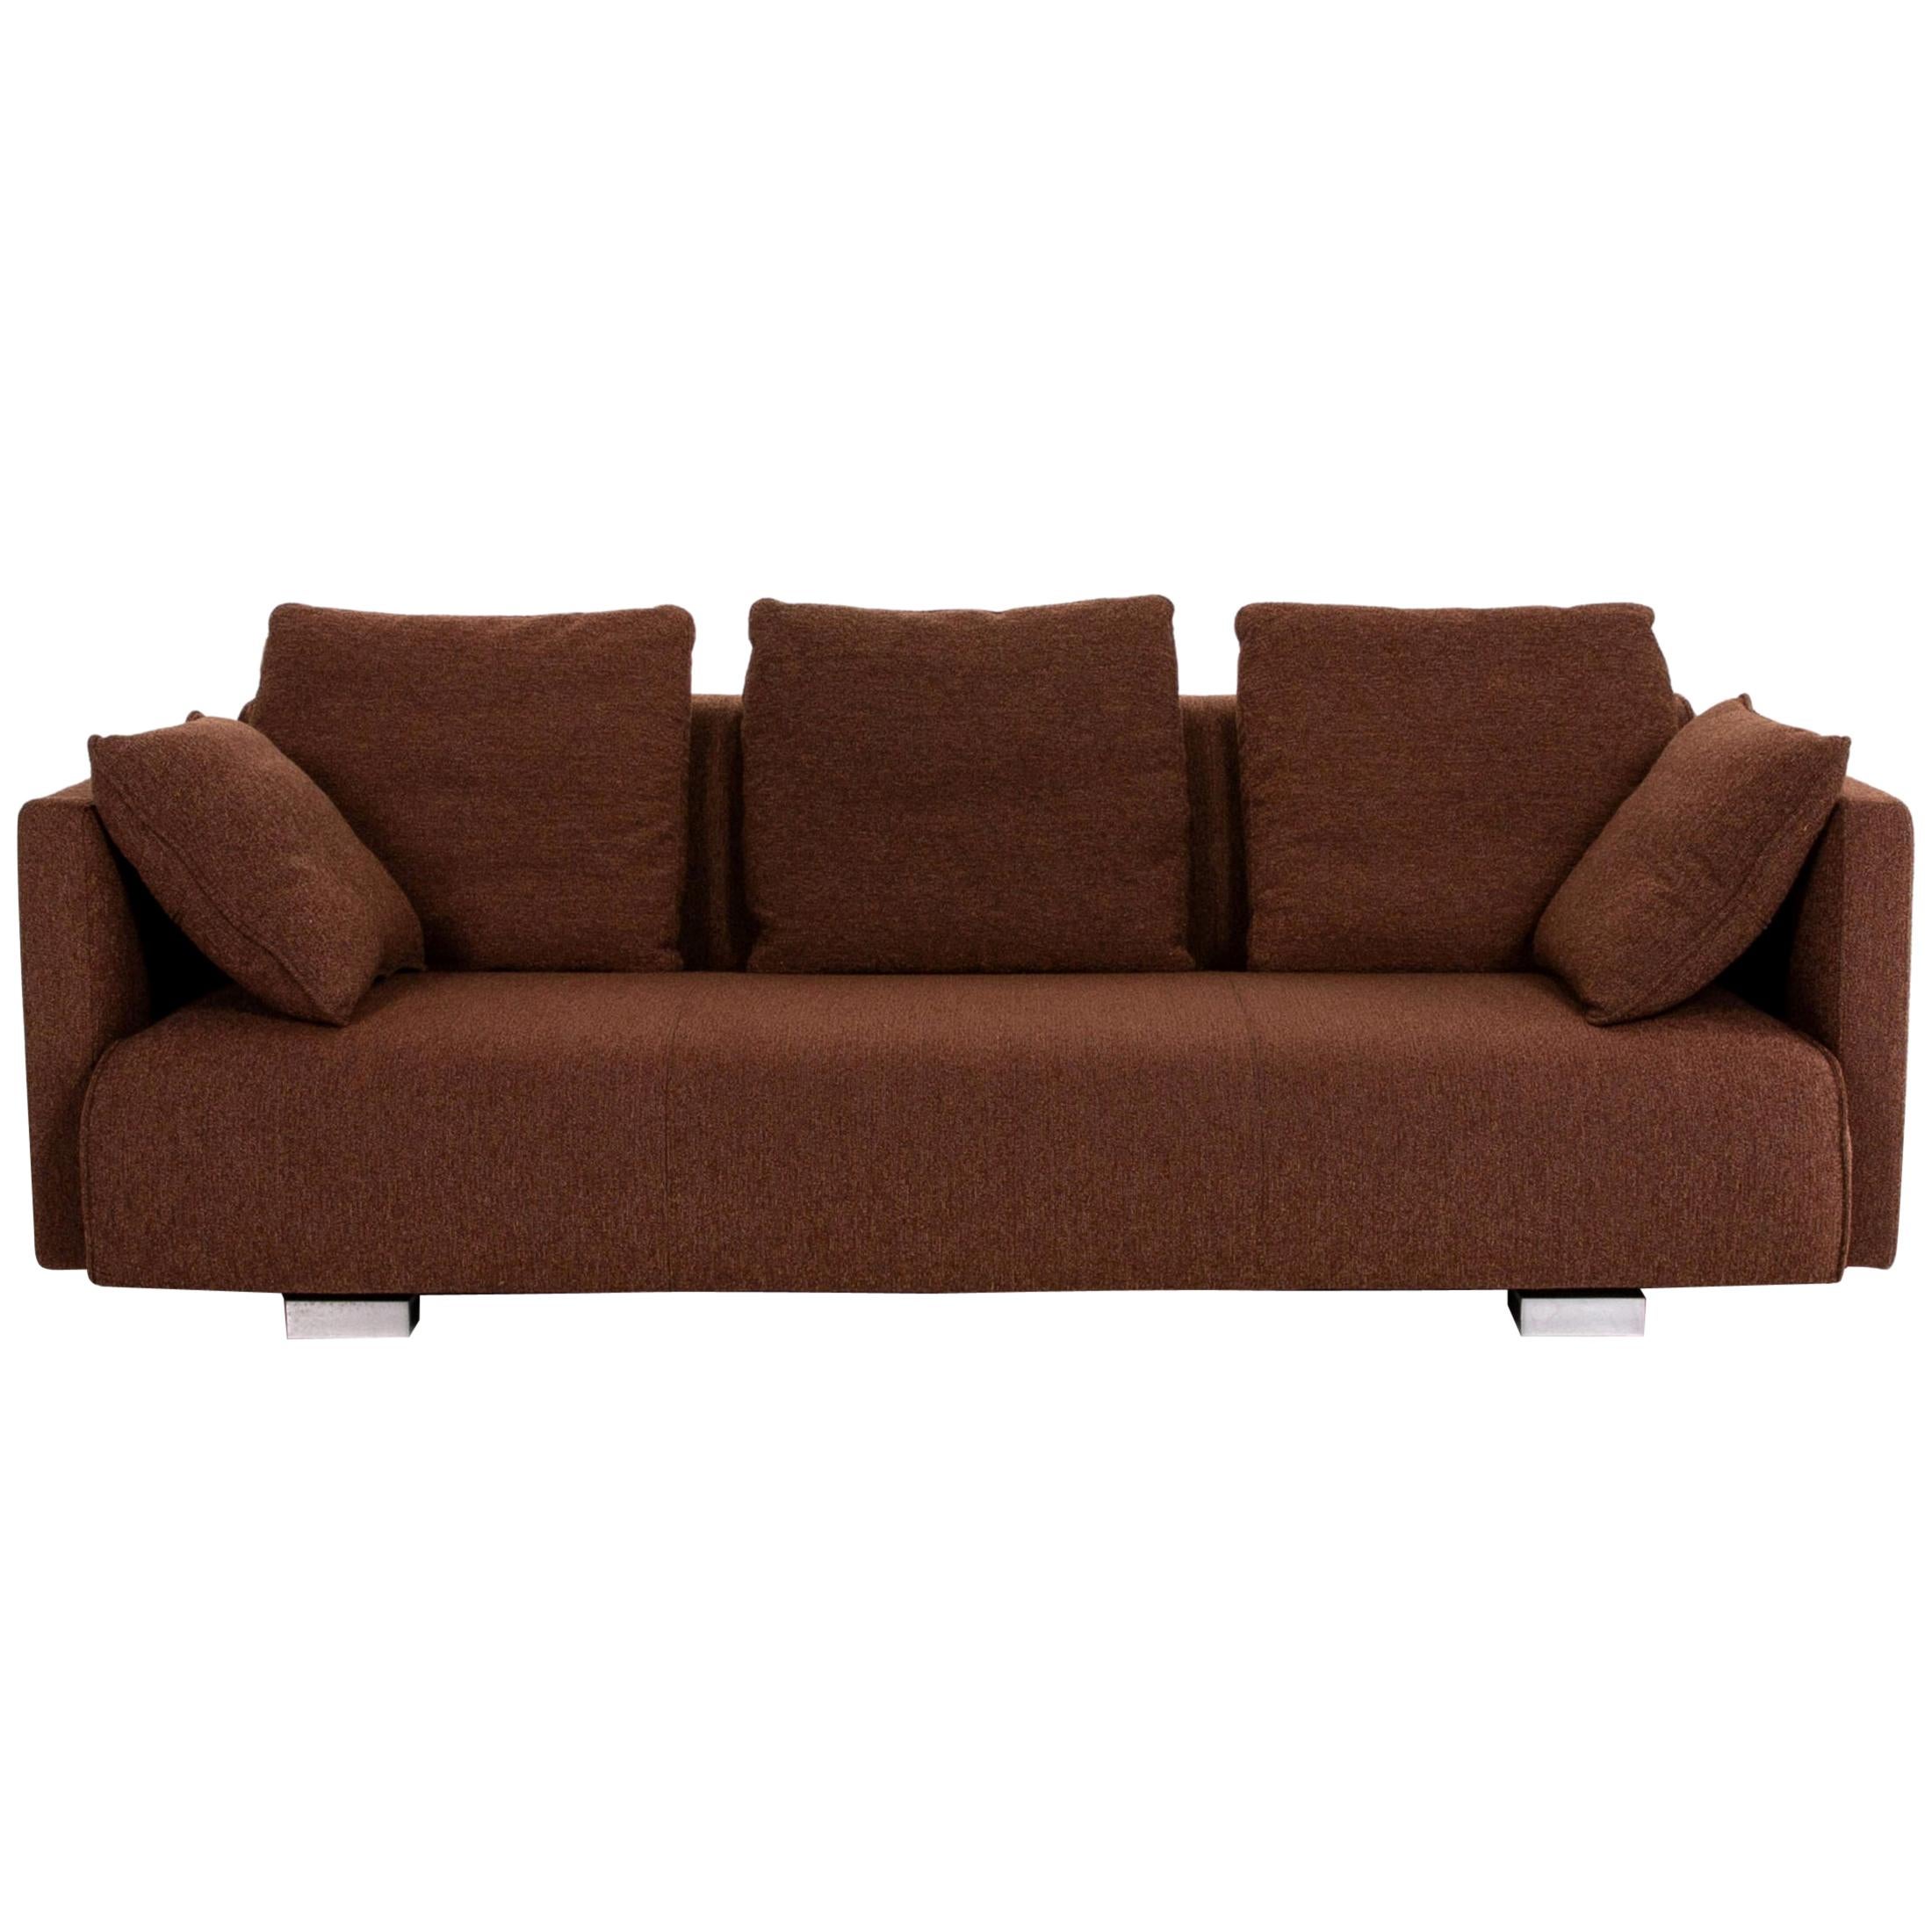 Rolf Benz 6300 Fabric Sofa Brown Three-Seat Couch For Sale